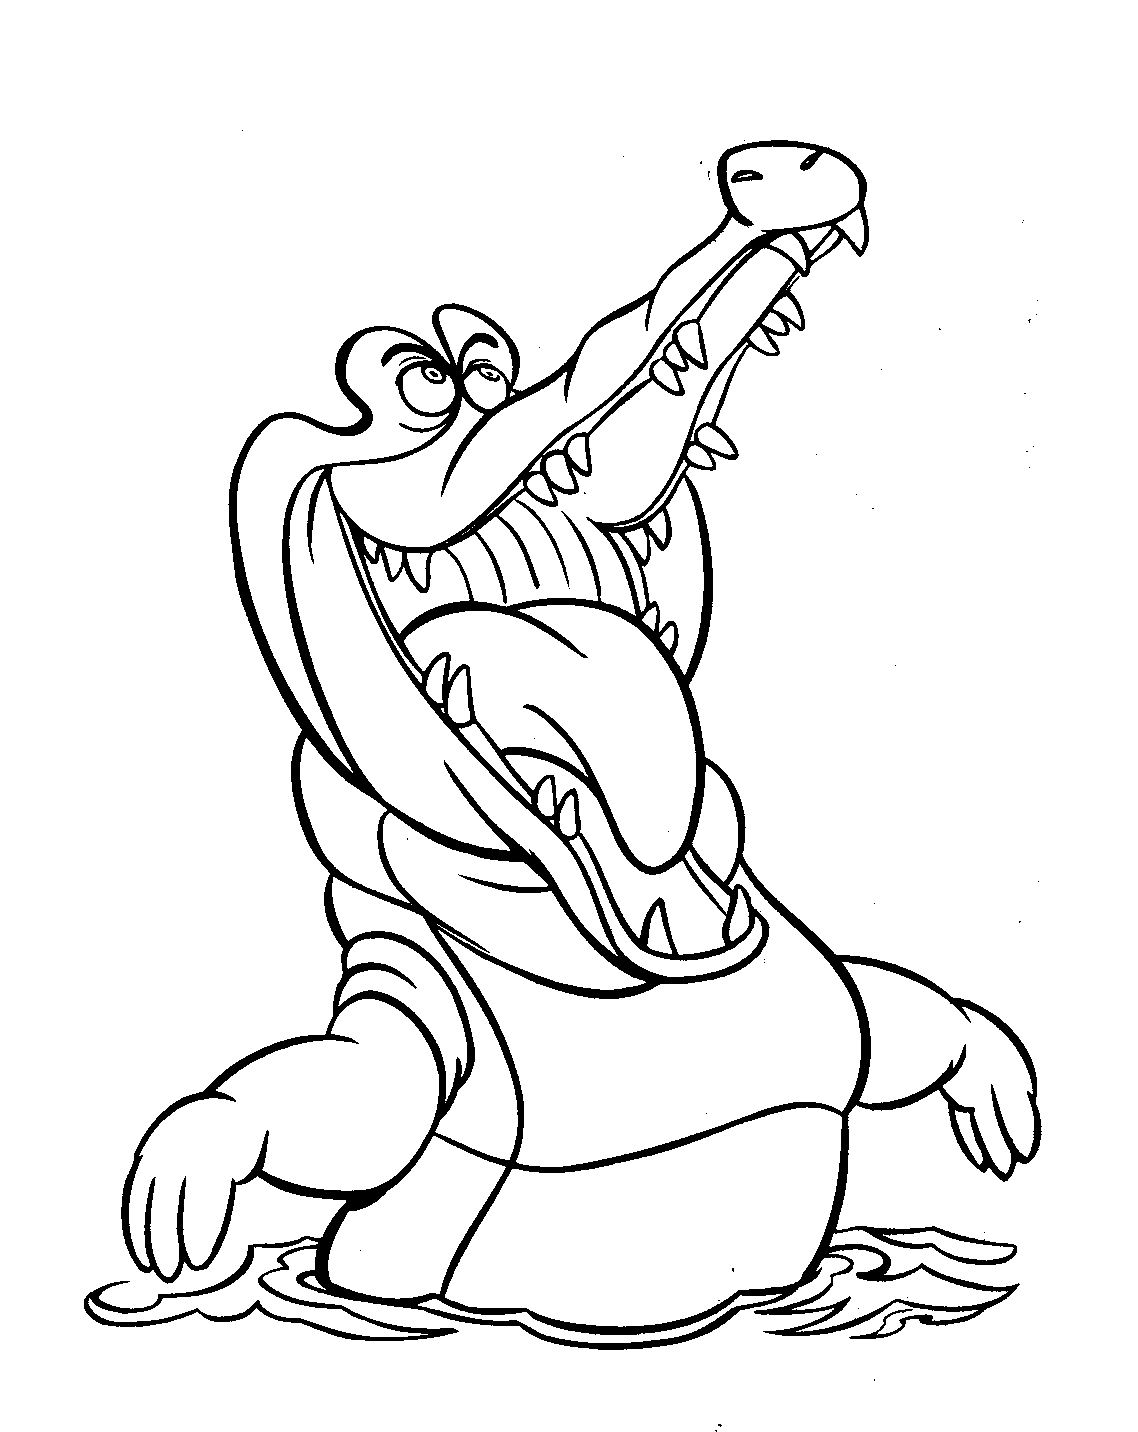 captain hook coloring pages to download and print for free